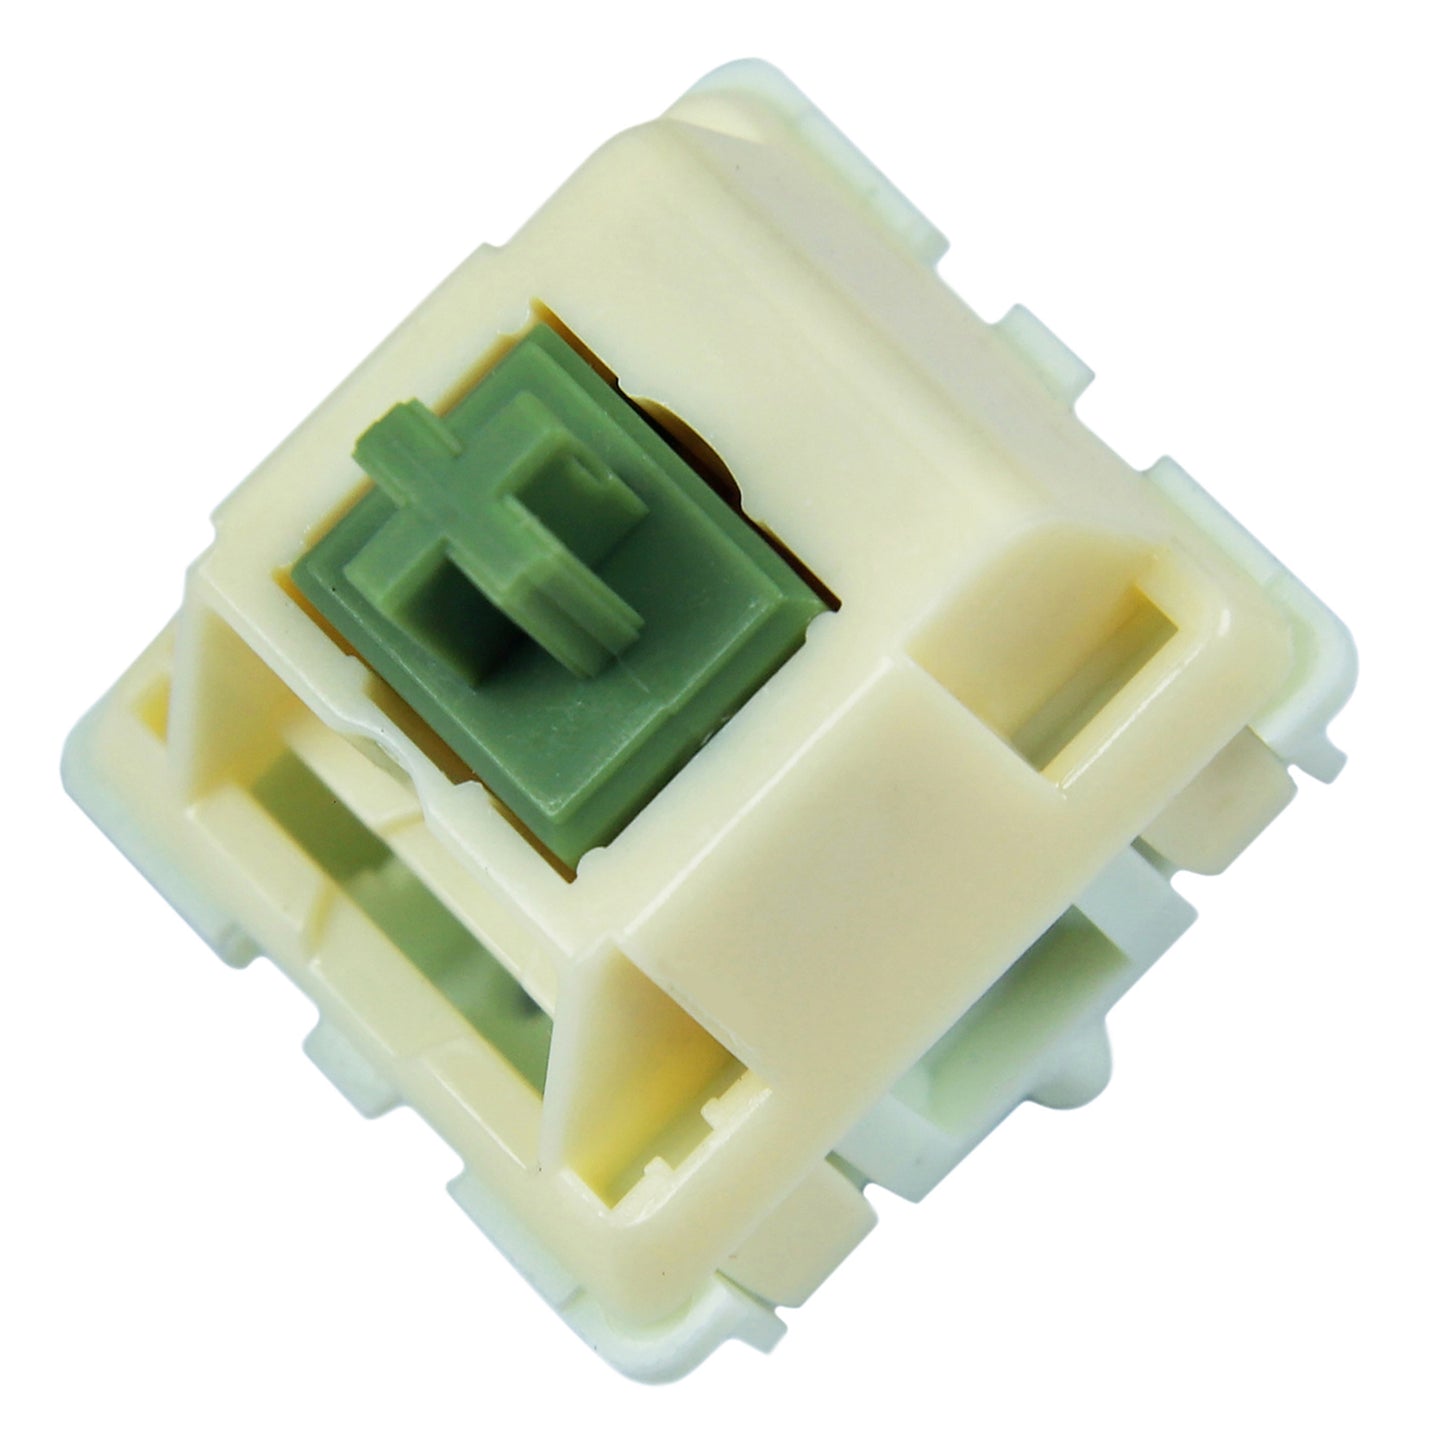 [In Selling]JWK Customized Matcha MX Switches(Linear 5 Pin SMD)